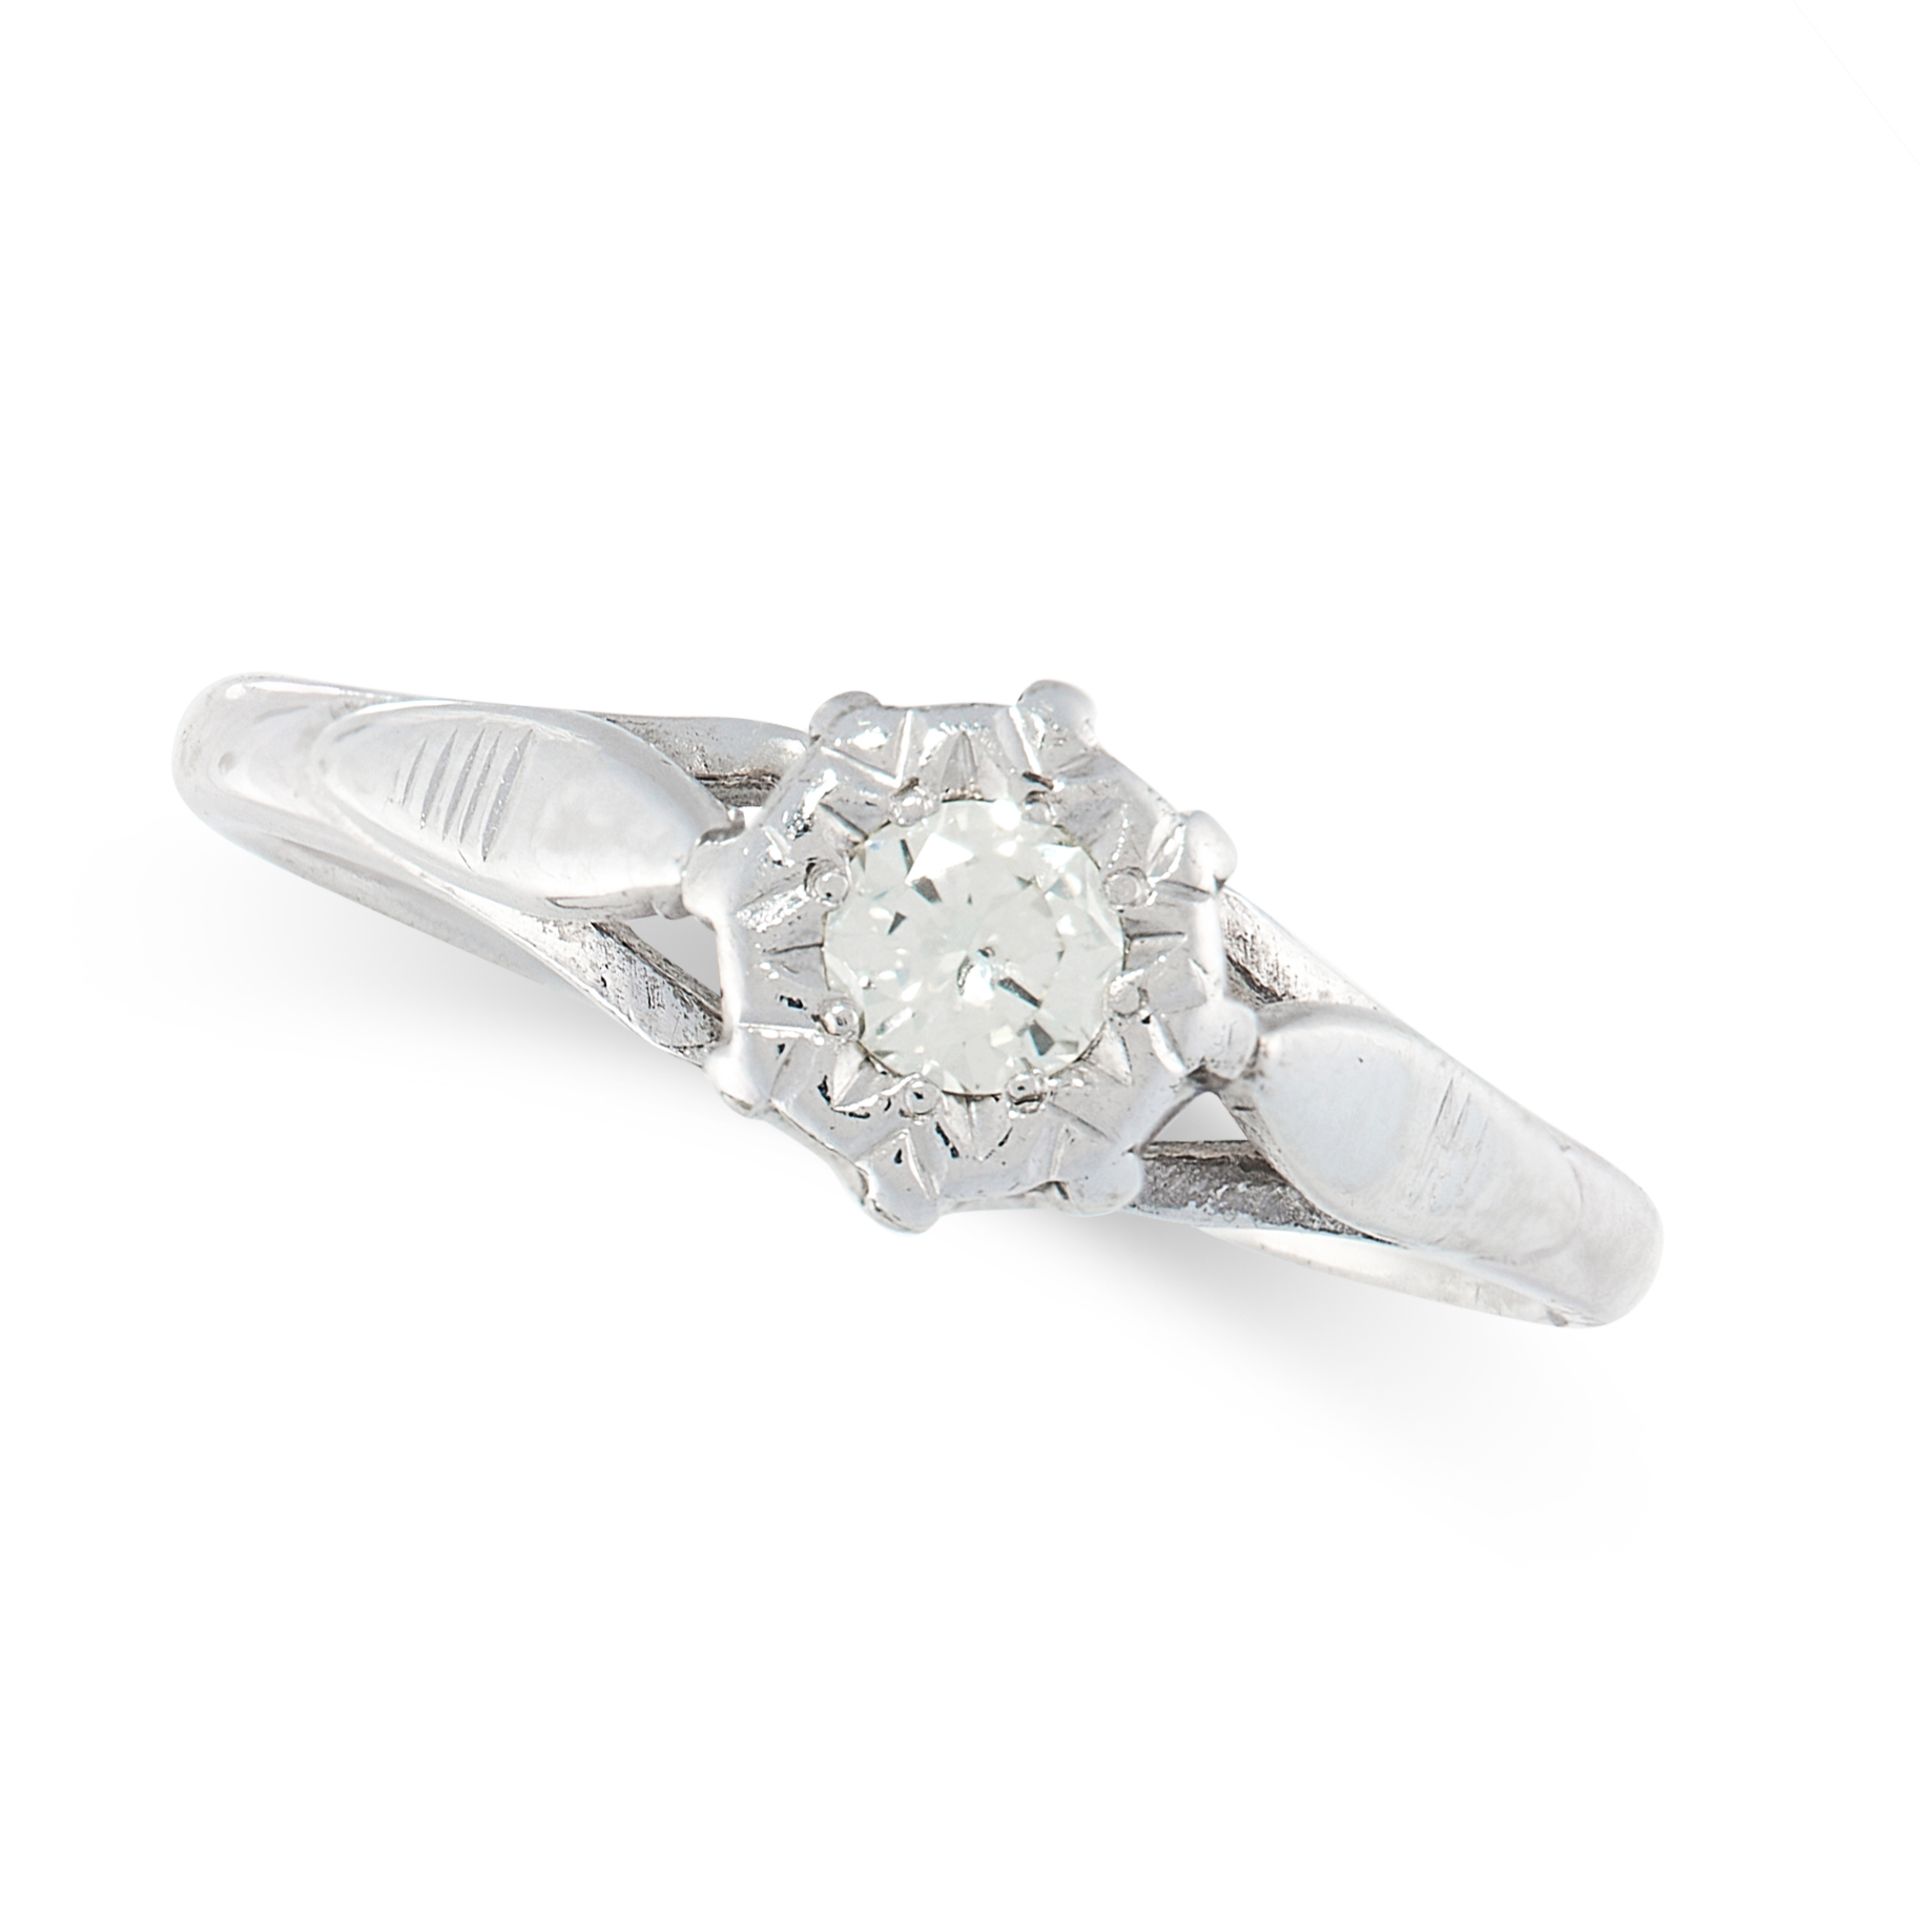 A DIAMOND SOLITAIRE RING in 18ct white gold, set with a round cut diamonds, British hallmarks,